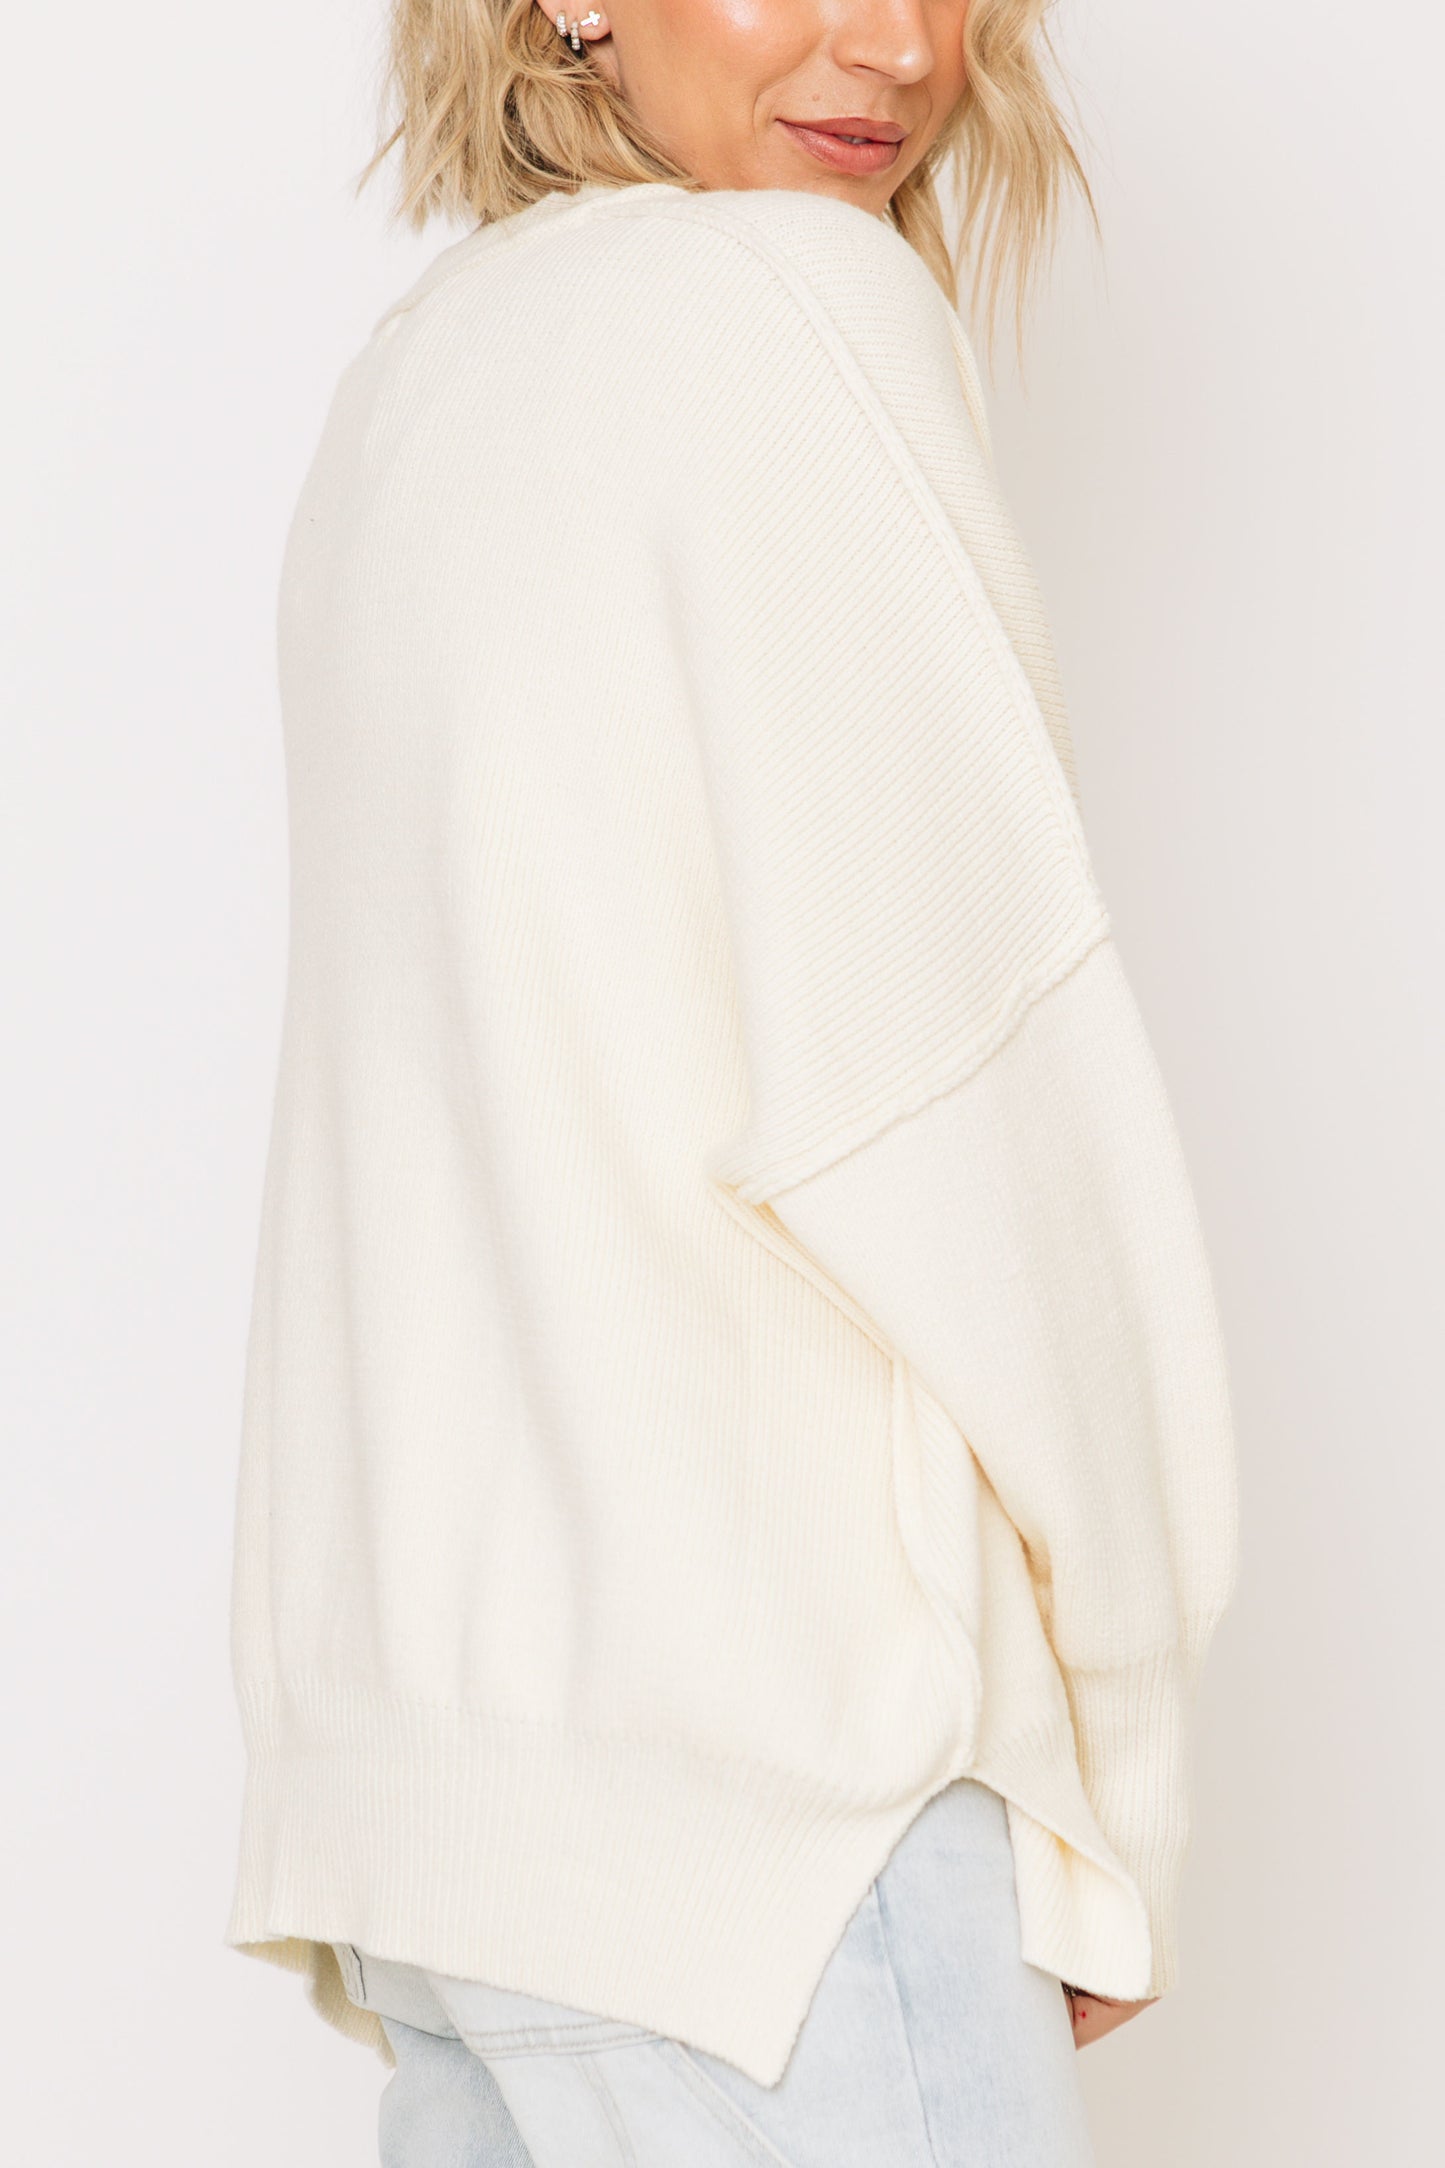 RESTOCK EXPECTED 10/2 - FP DUPE Drop Shoulder Sleeve Sweater (S-2XL)